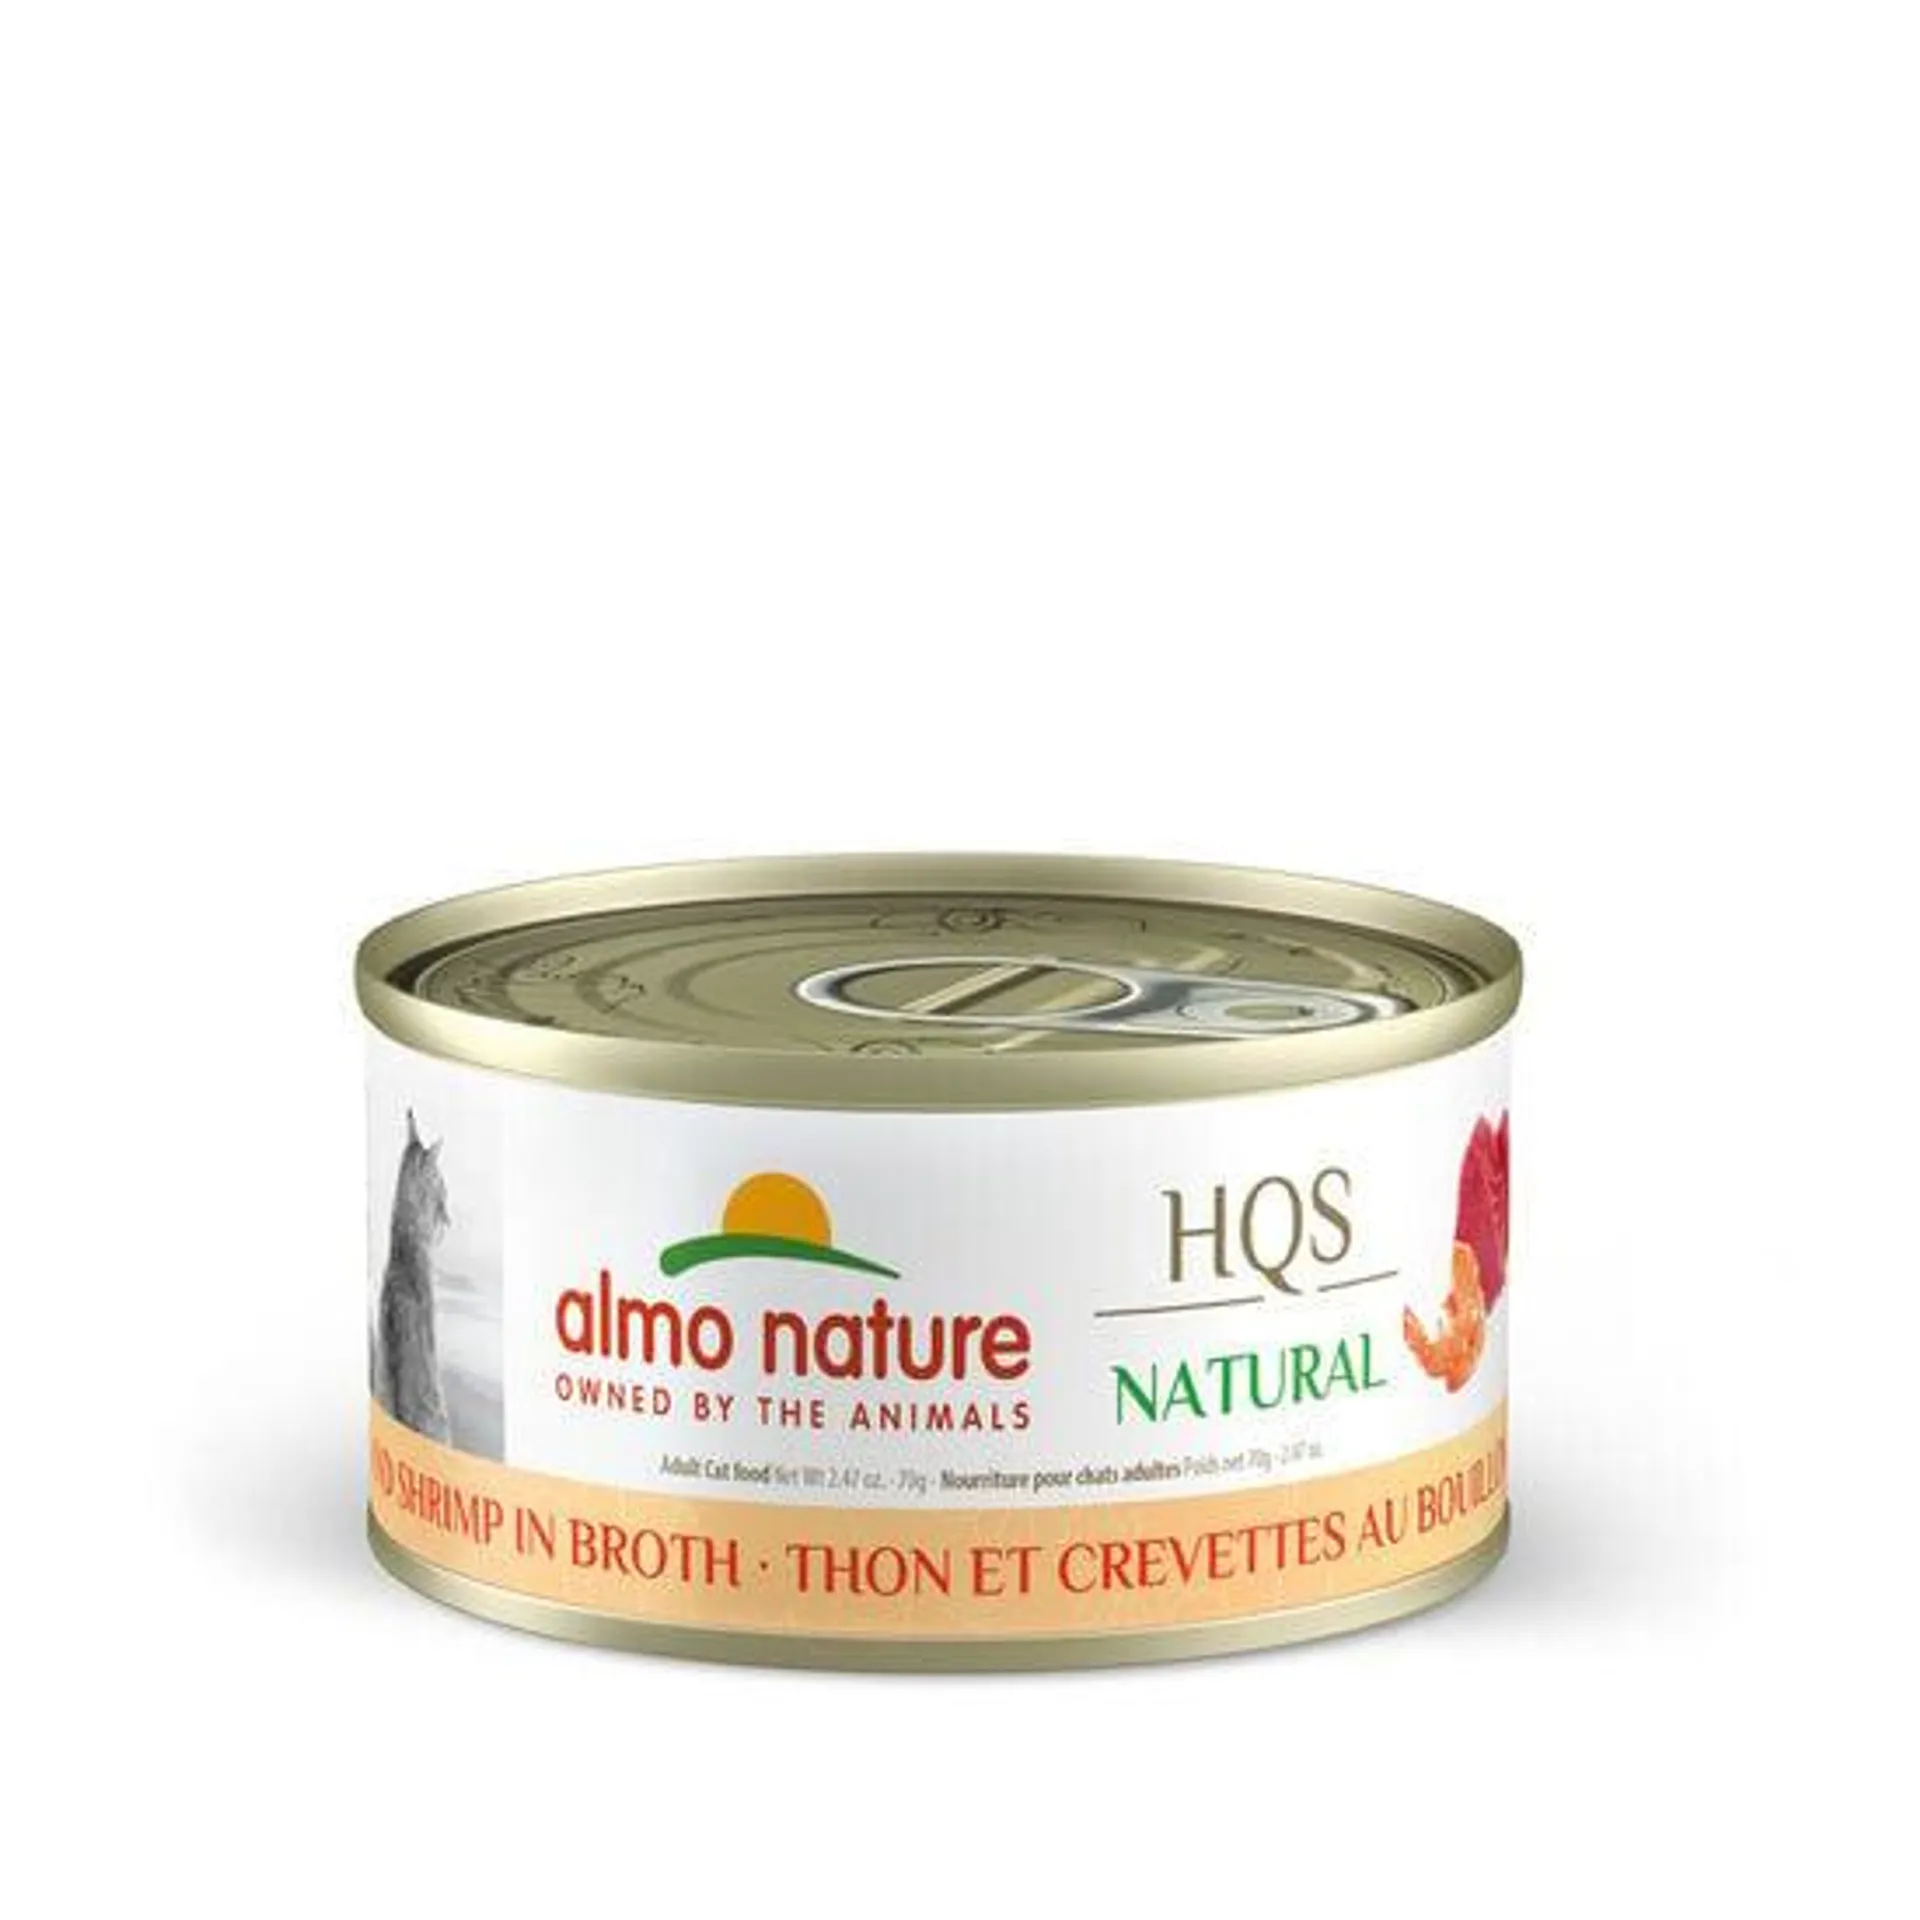 Tuna and shrimp in broth for adult cats